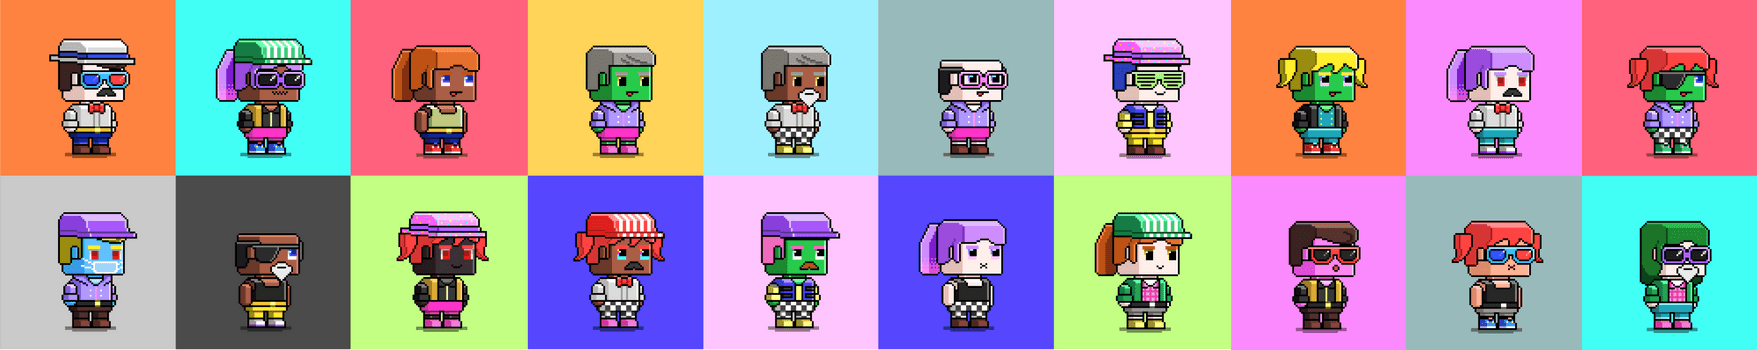 Vox characters 1